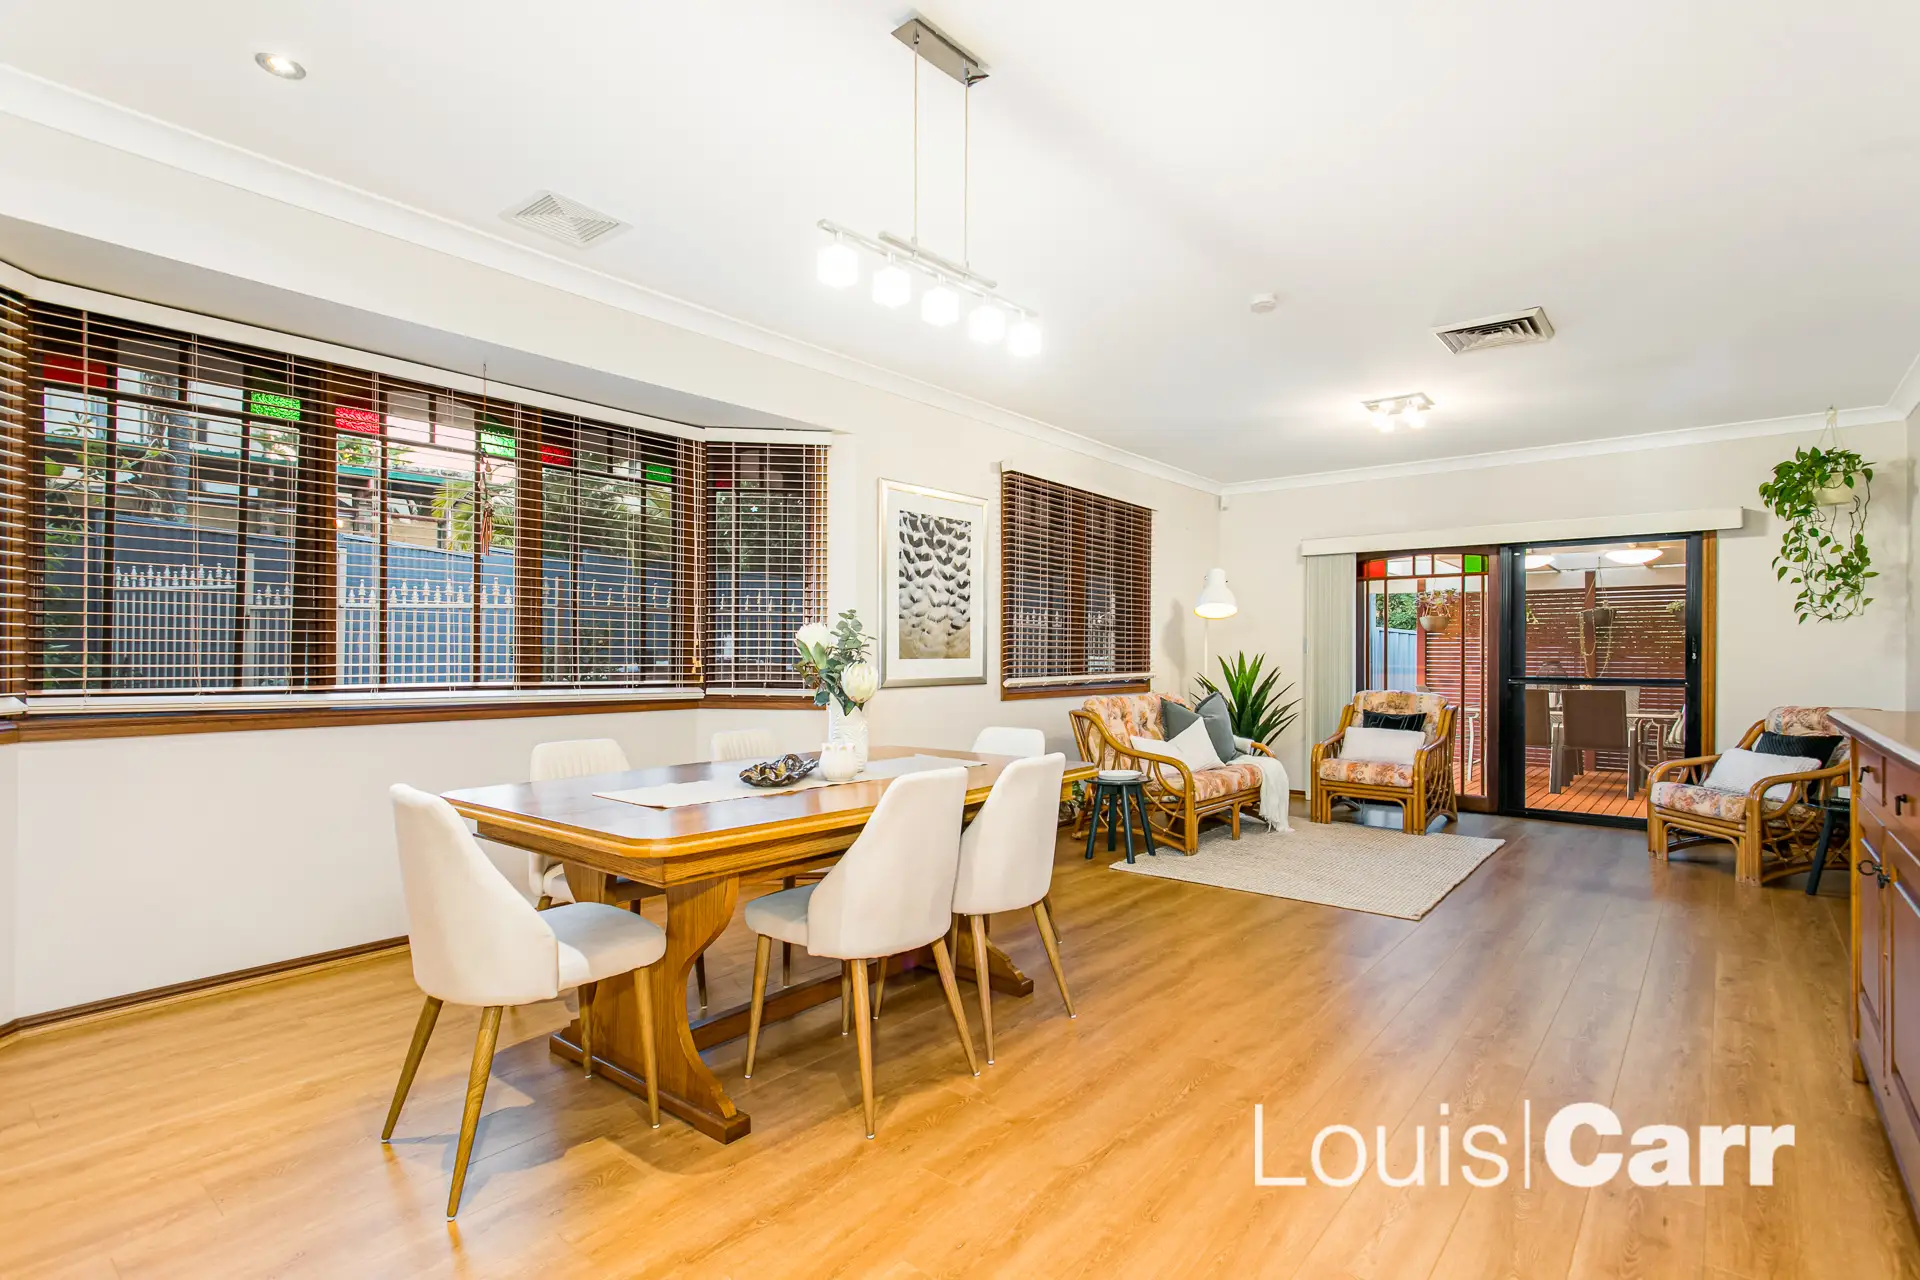 Photo #6: 8 Millers Way, West Pennant Hills - Sold by Louis Carr Real Estate